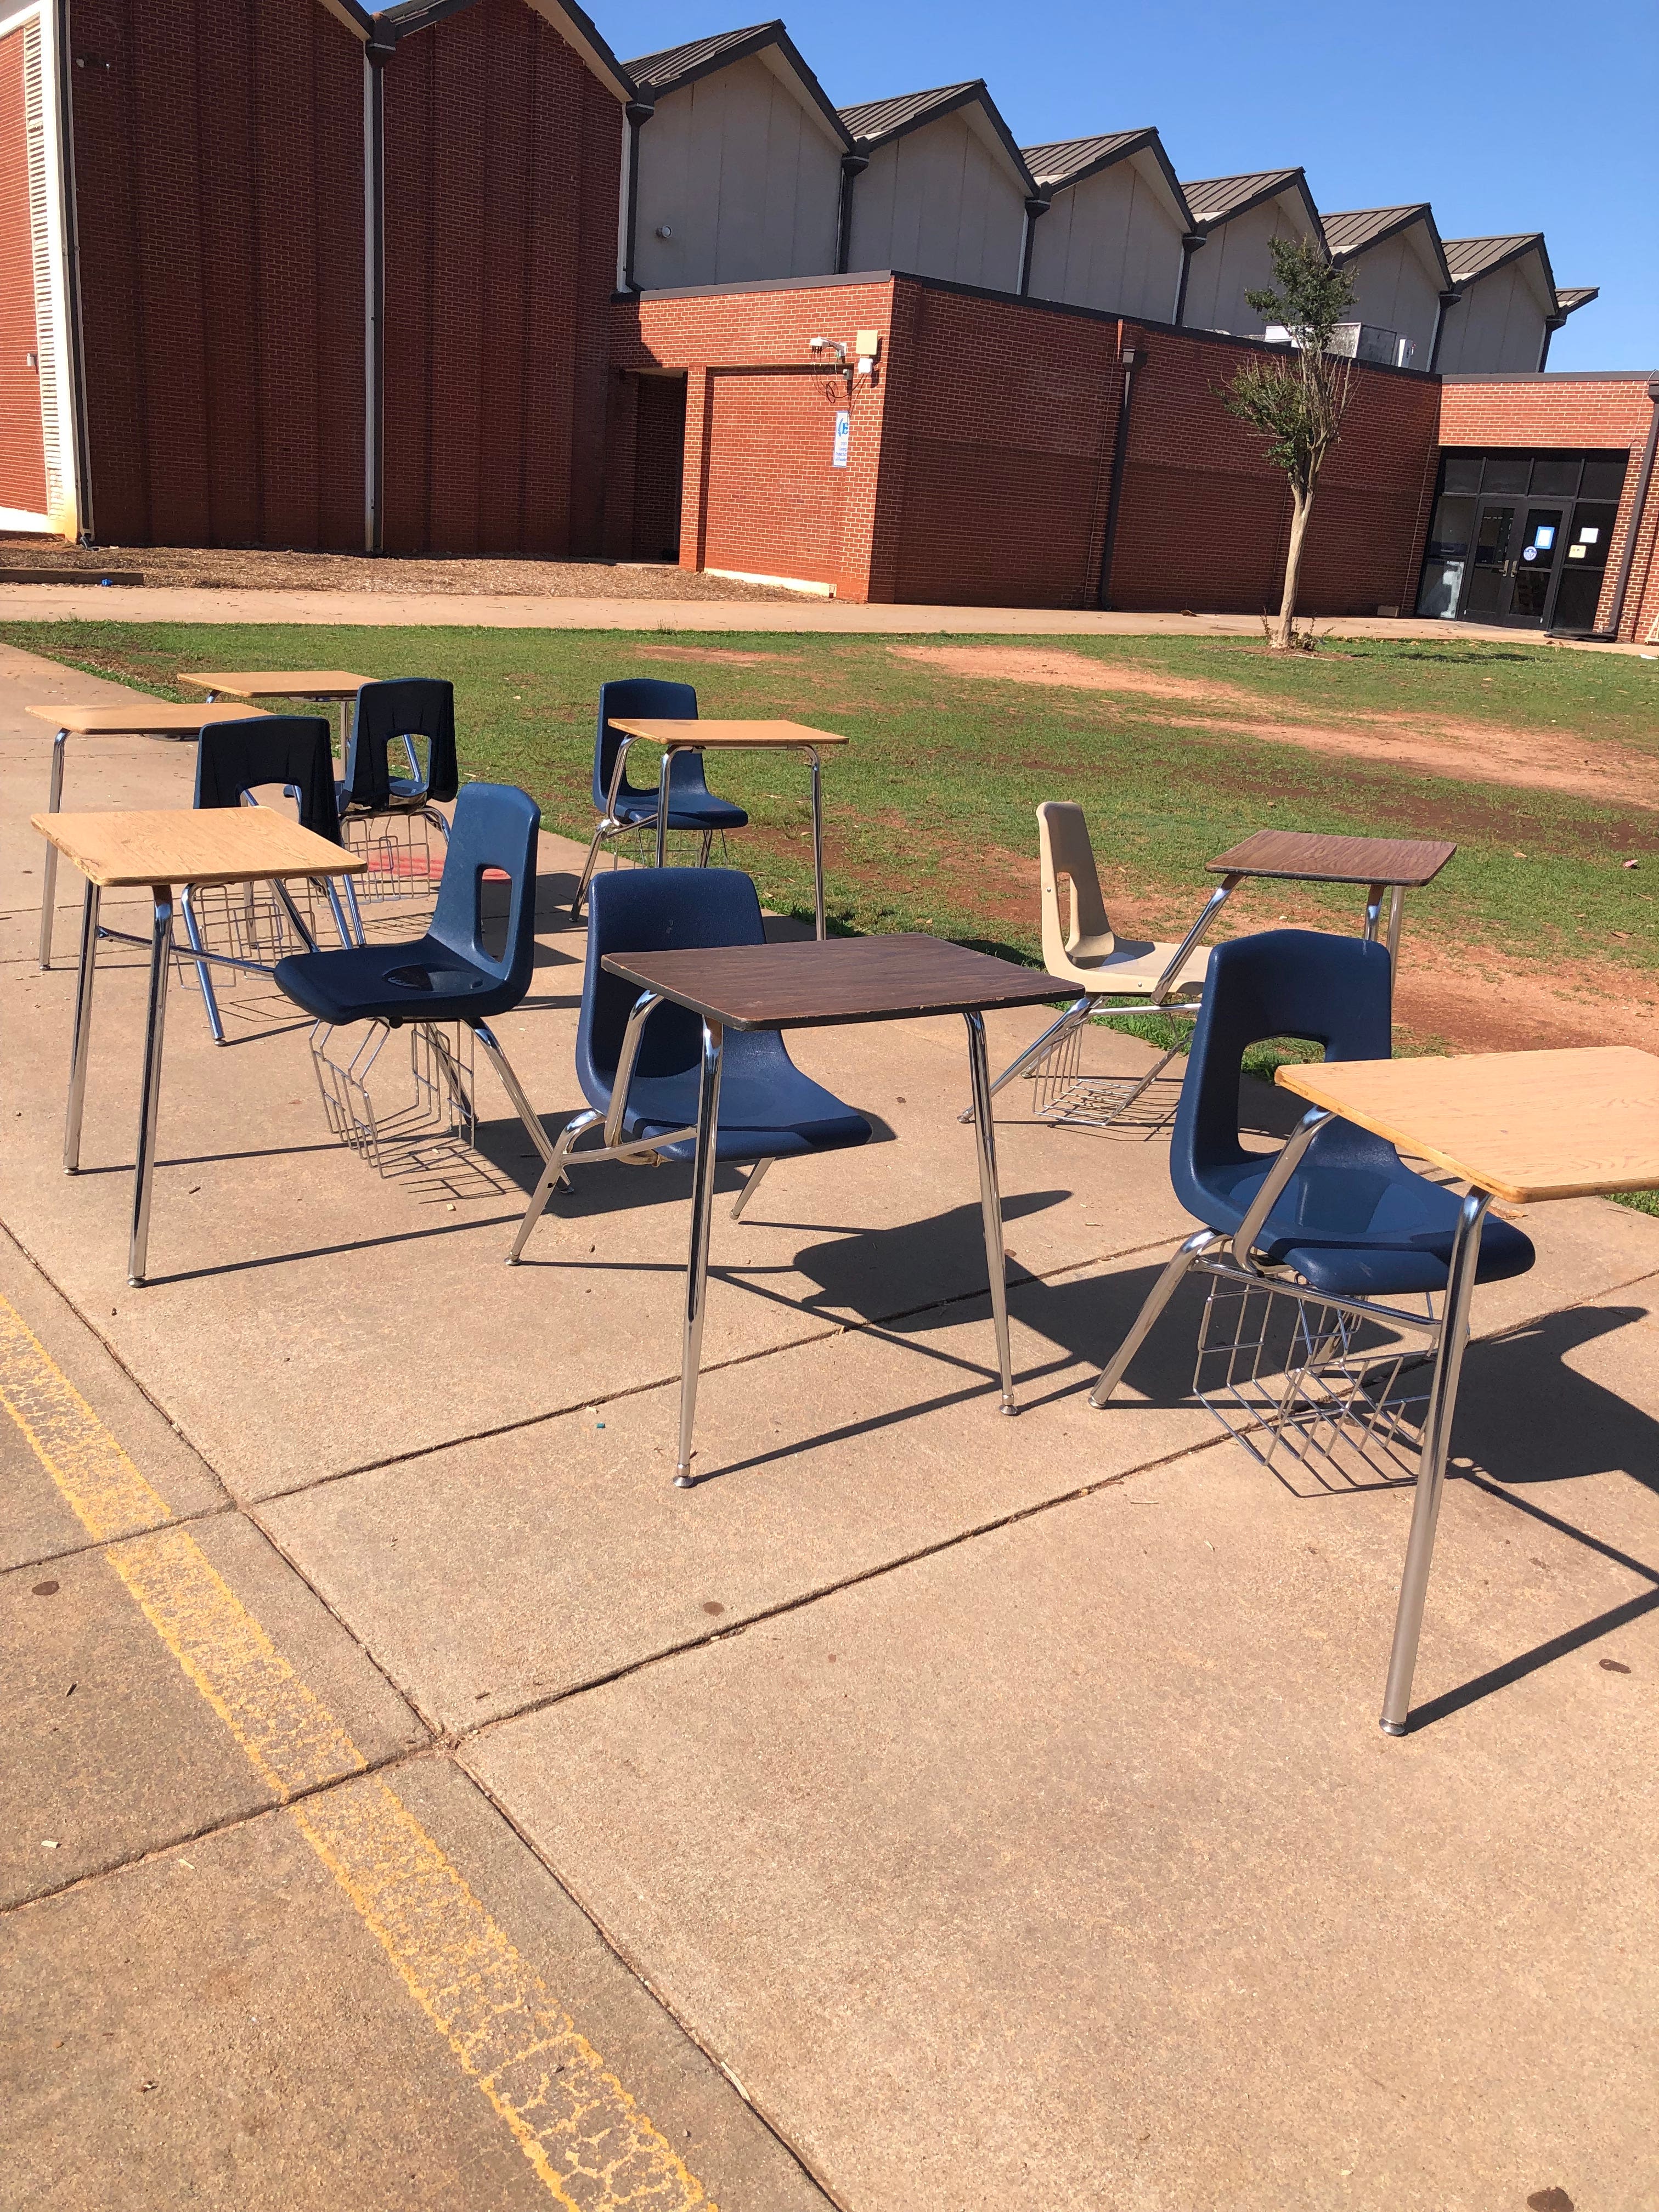 Furniture left outside Athens school wasn't meant to be given away, say officials